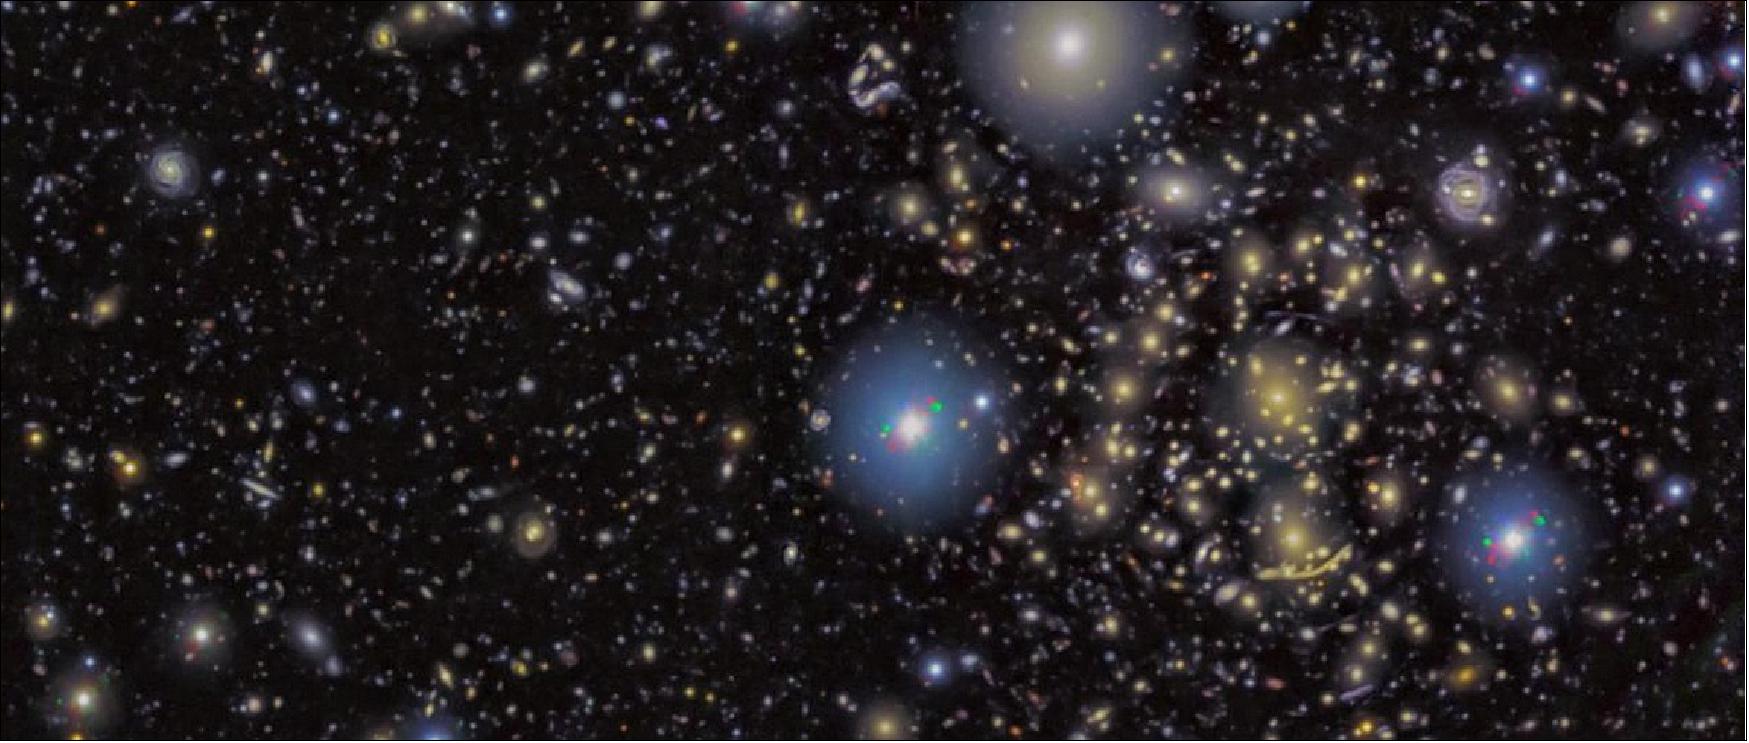 Figure 6: Image of the galaxy cluster Abell 370, one of the regions of the sky observed in the SHARDS Frontier Fields project. This is the deepest image ever taken to detect galaxies with emission lines, which are actively forming stars (image credit: GTC or GRANTECAN)